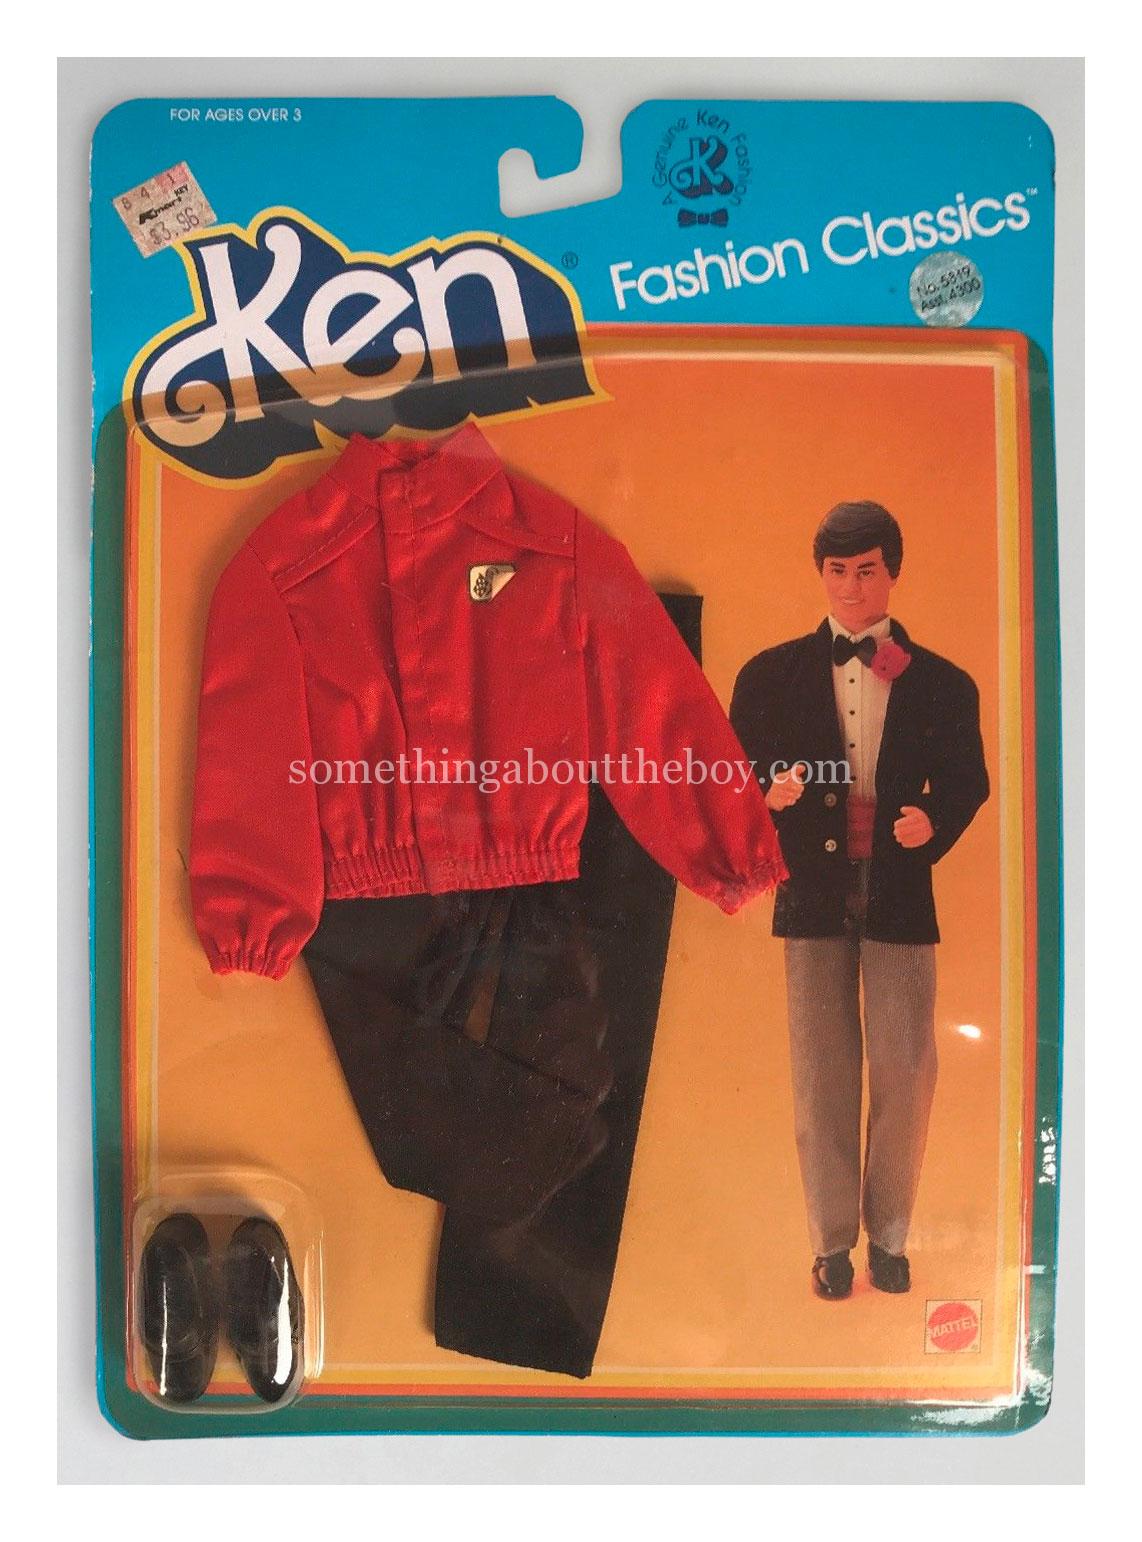  1983-84 Kmart Fashion Classics #5819 in original packaging (with loafers)